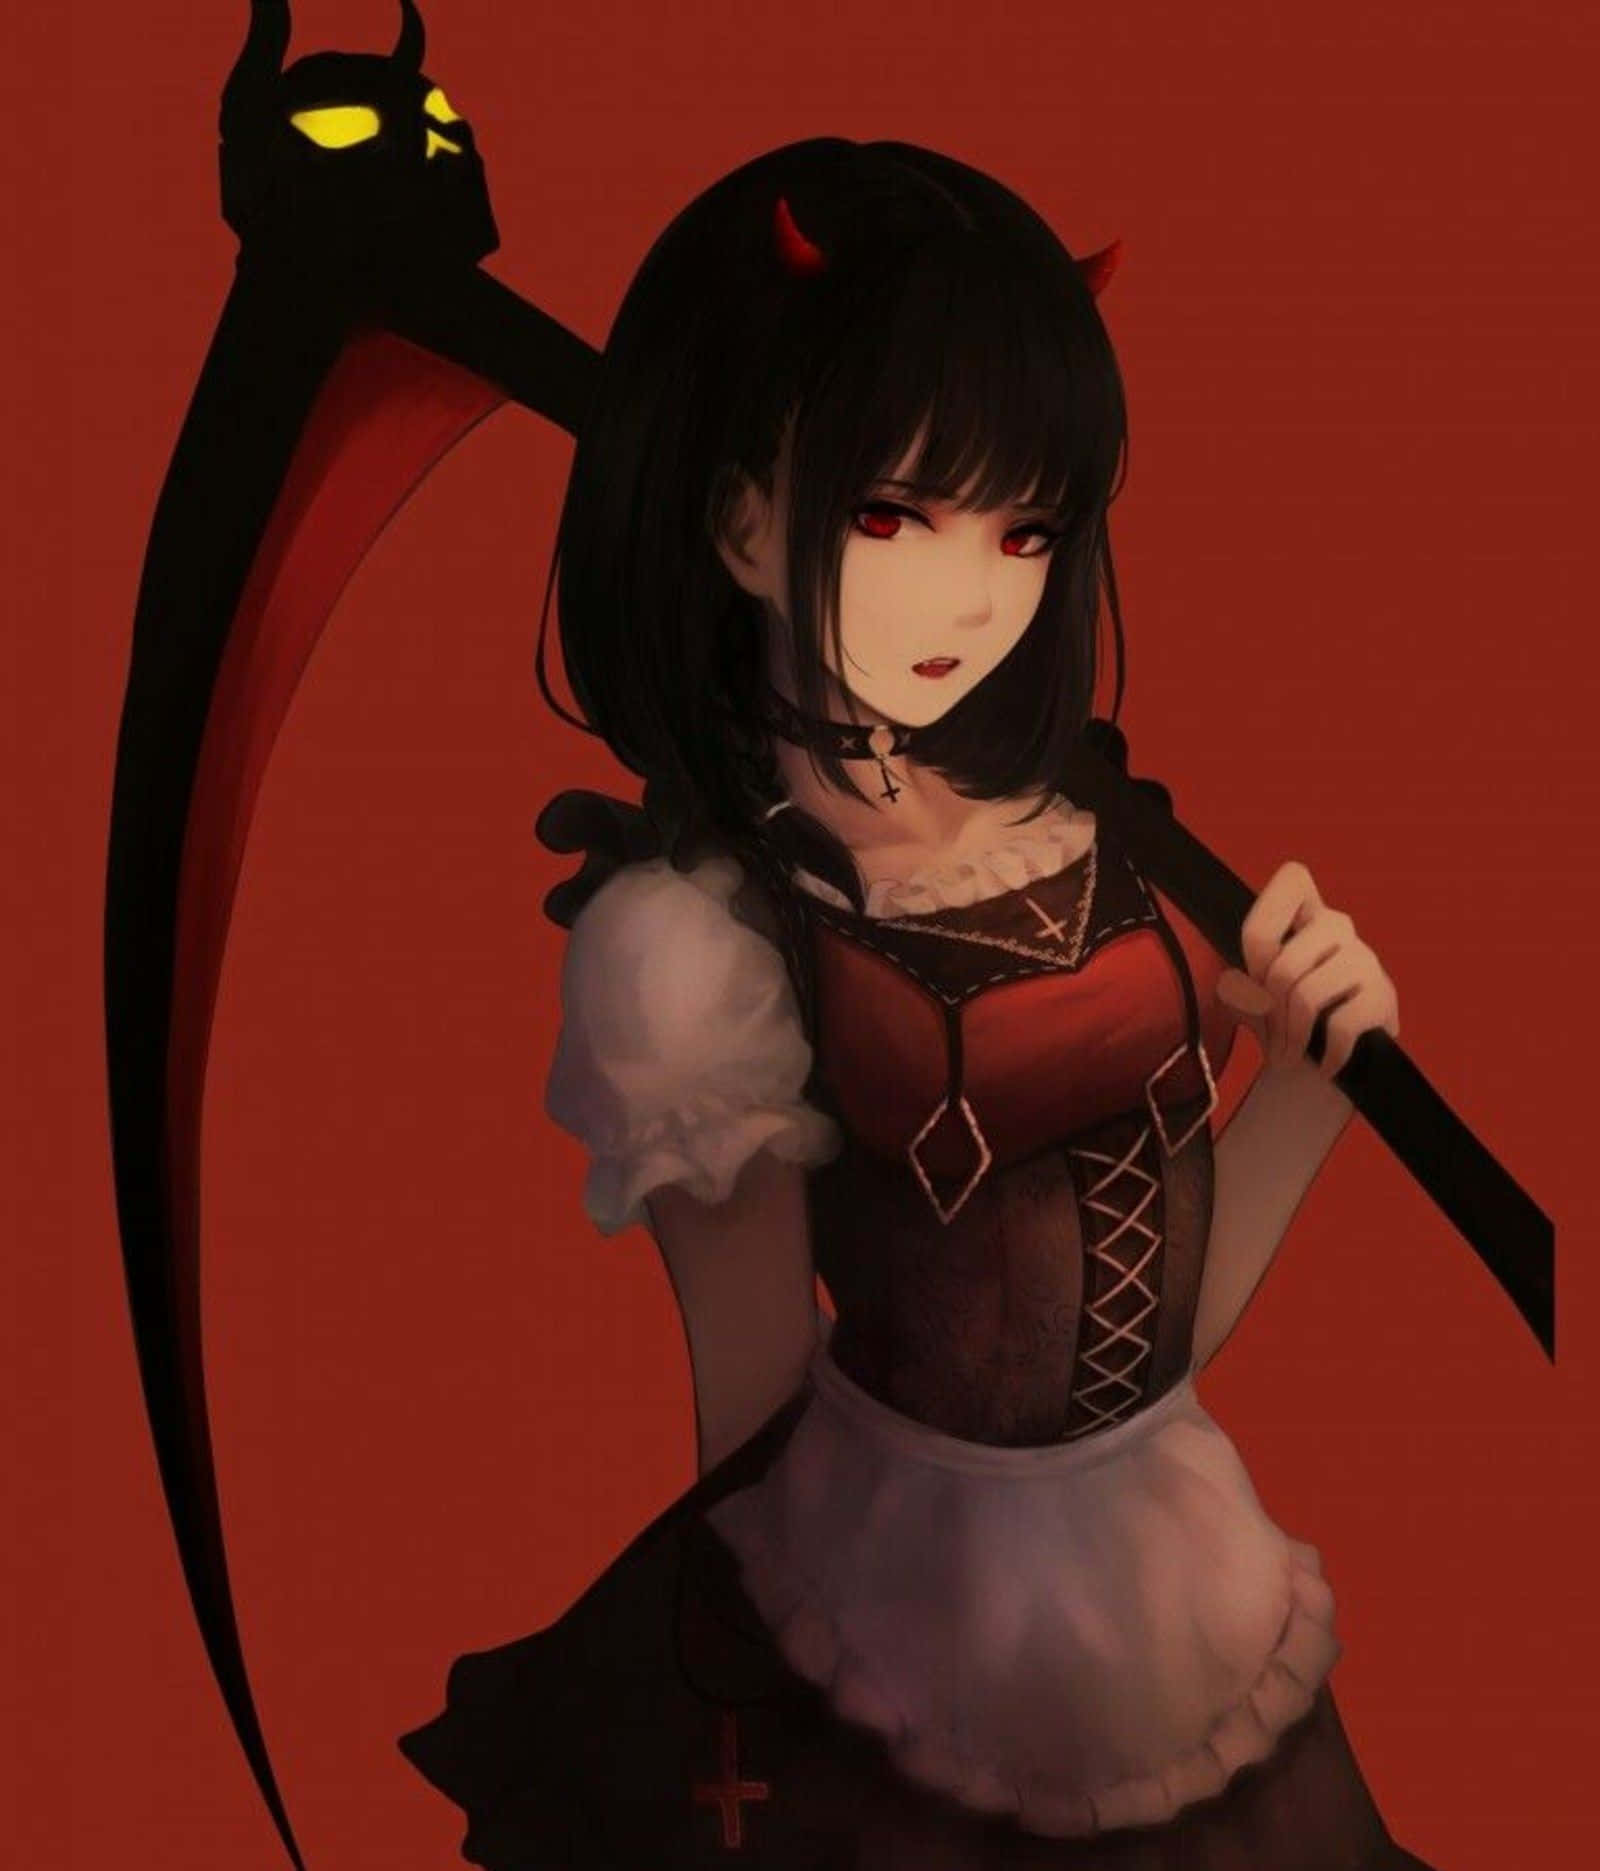 Cute devil girl with horns and a fiery attitude. Wallpaper